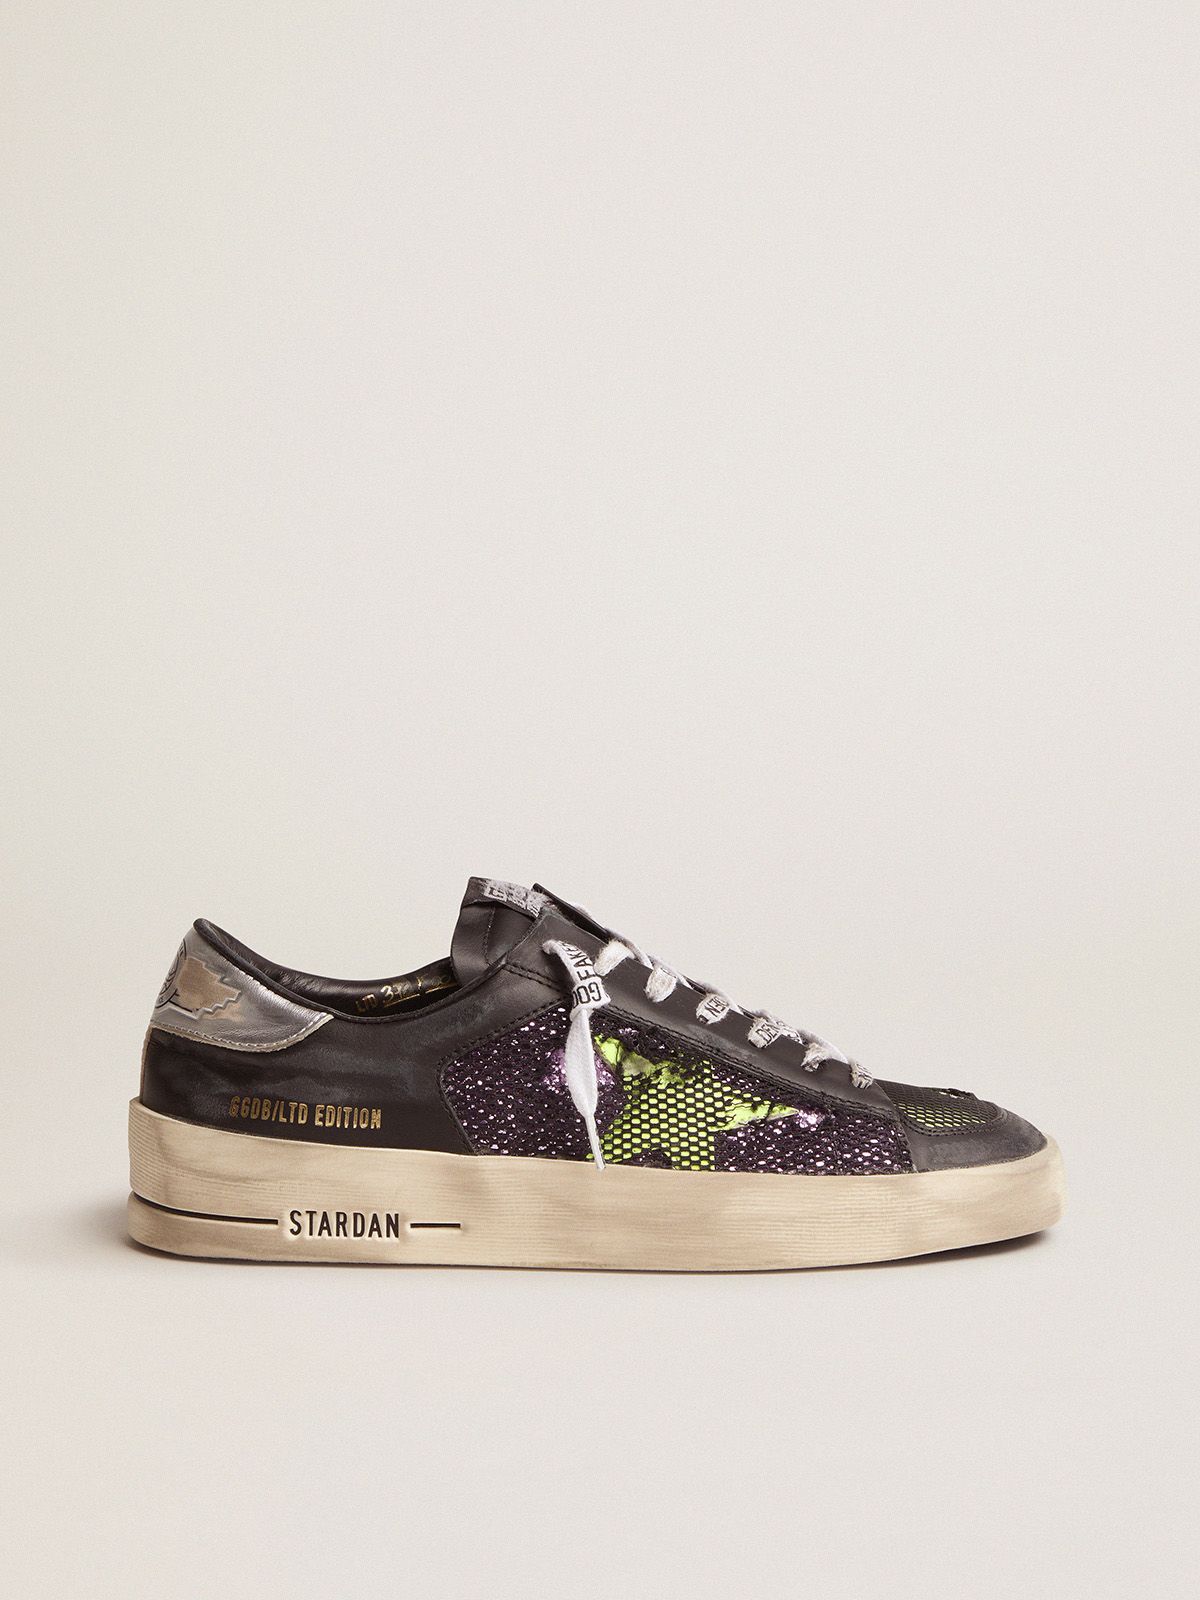 golden goose Stardan fluorescent glitter Limited Women’s sneakers details with and yellow LAB Edition